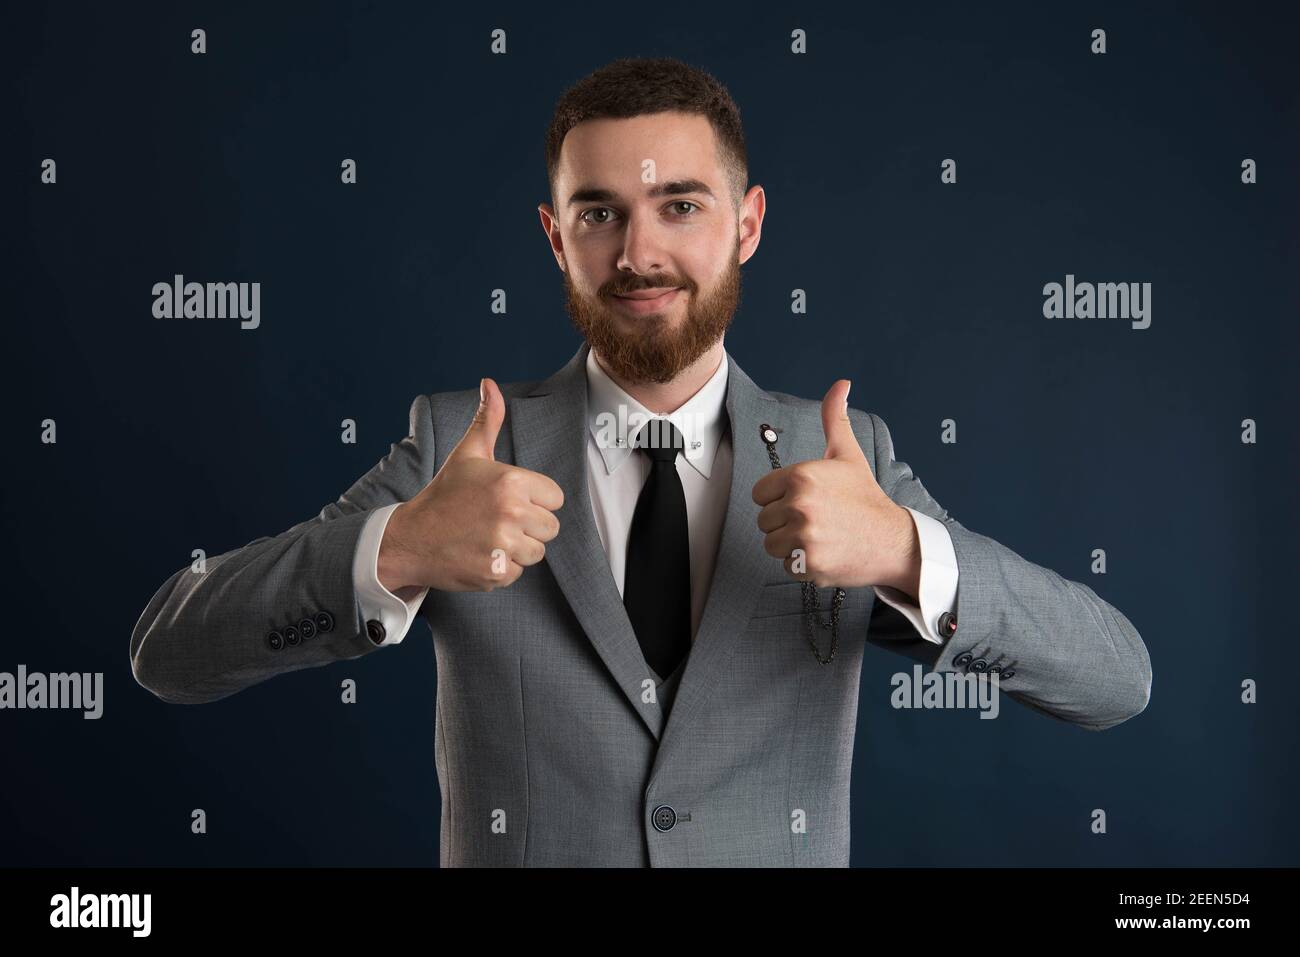 Smiling businessman showing double thumbs up wearing a black tie and grey suit Stock Photo